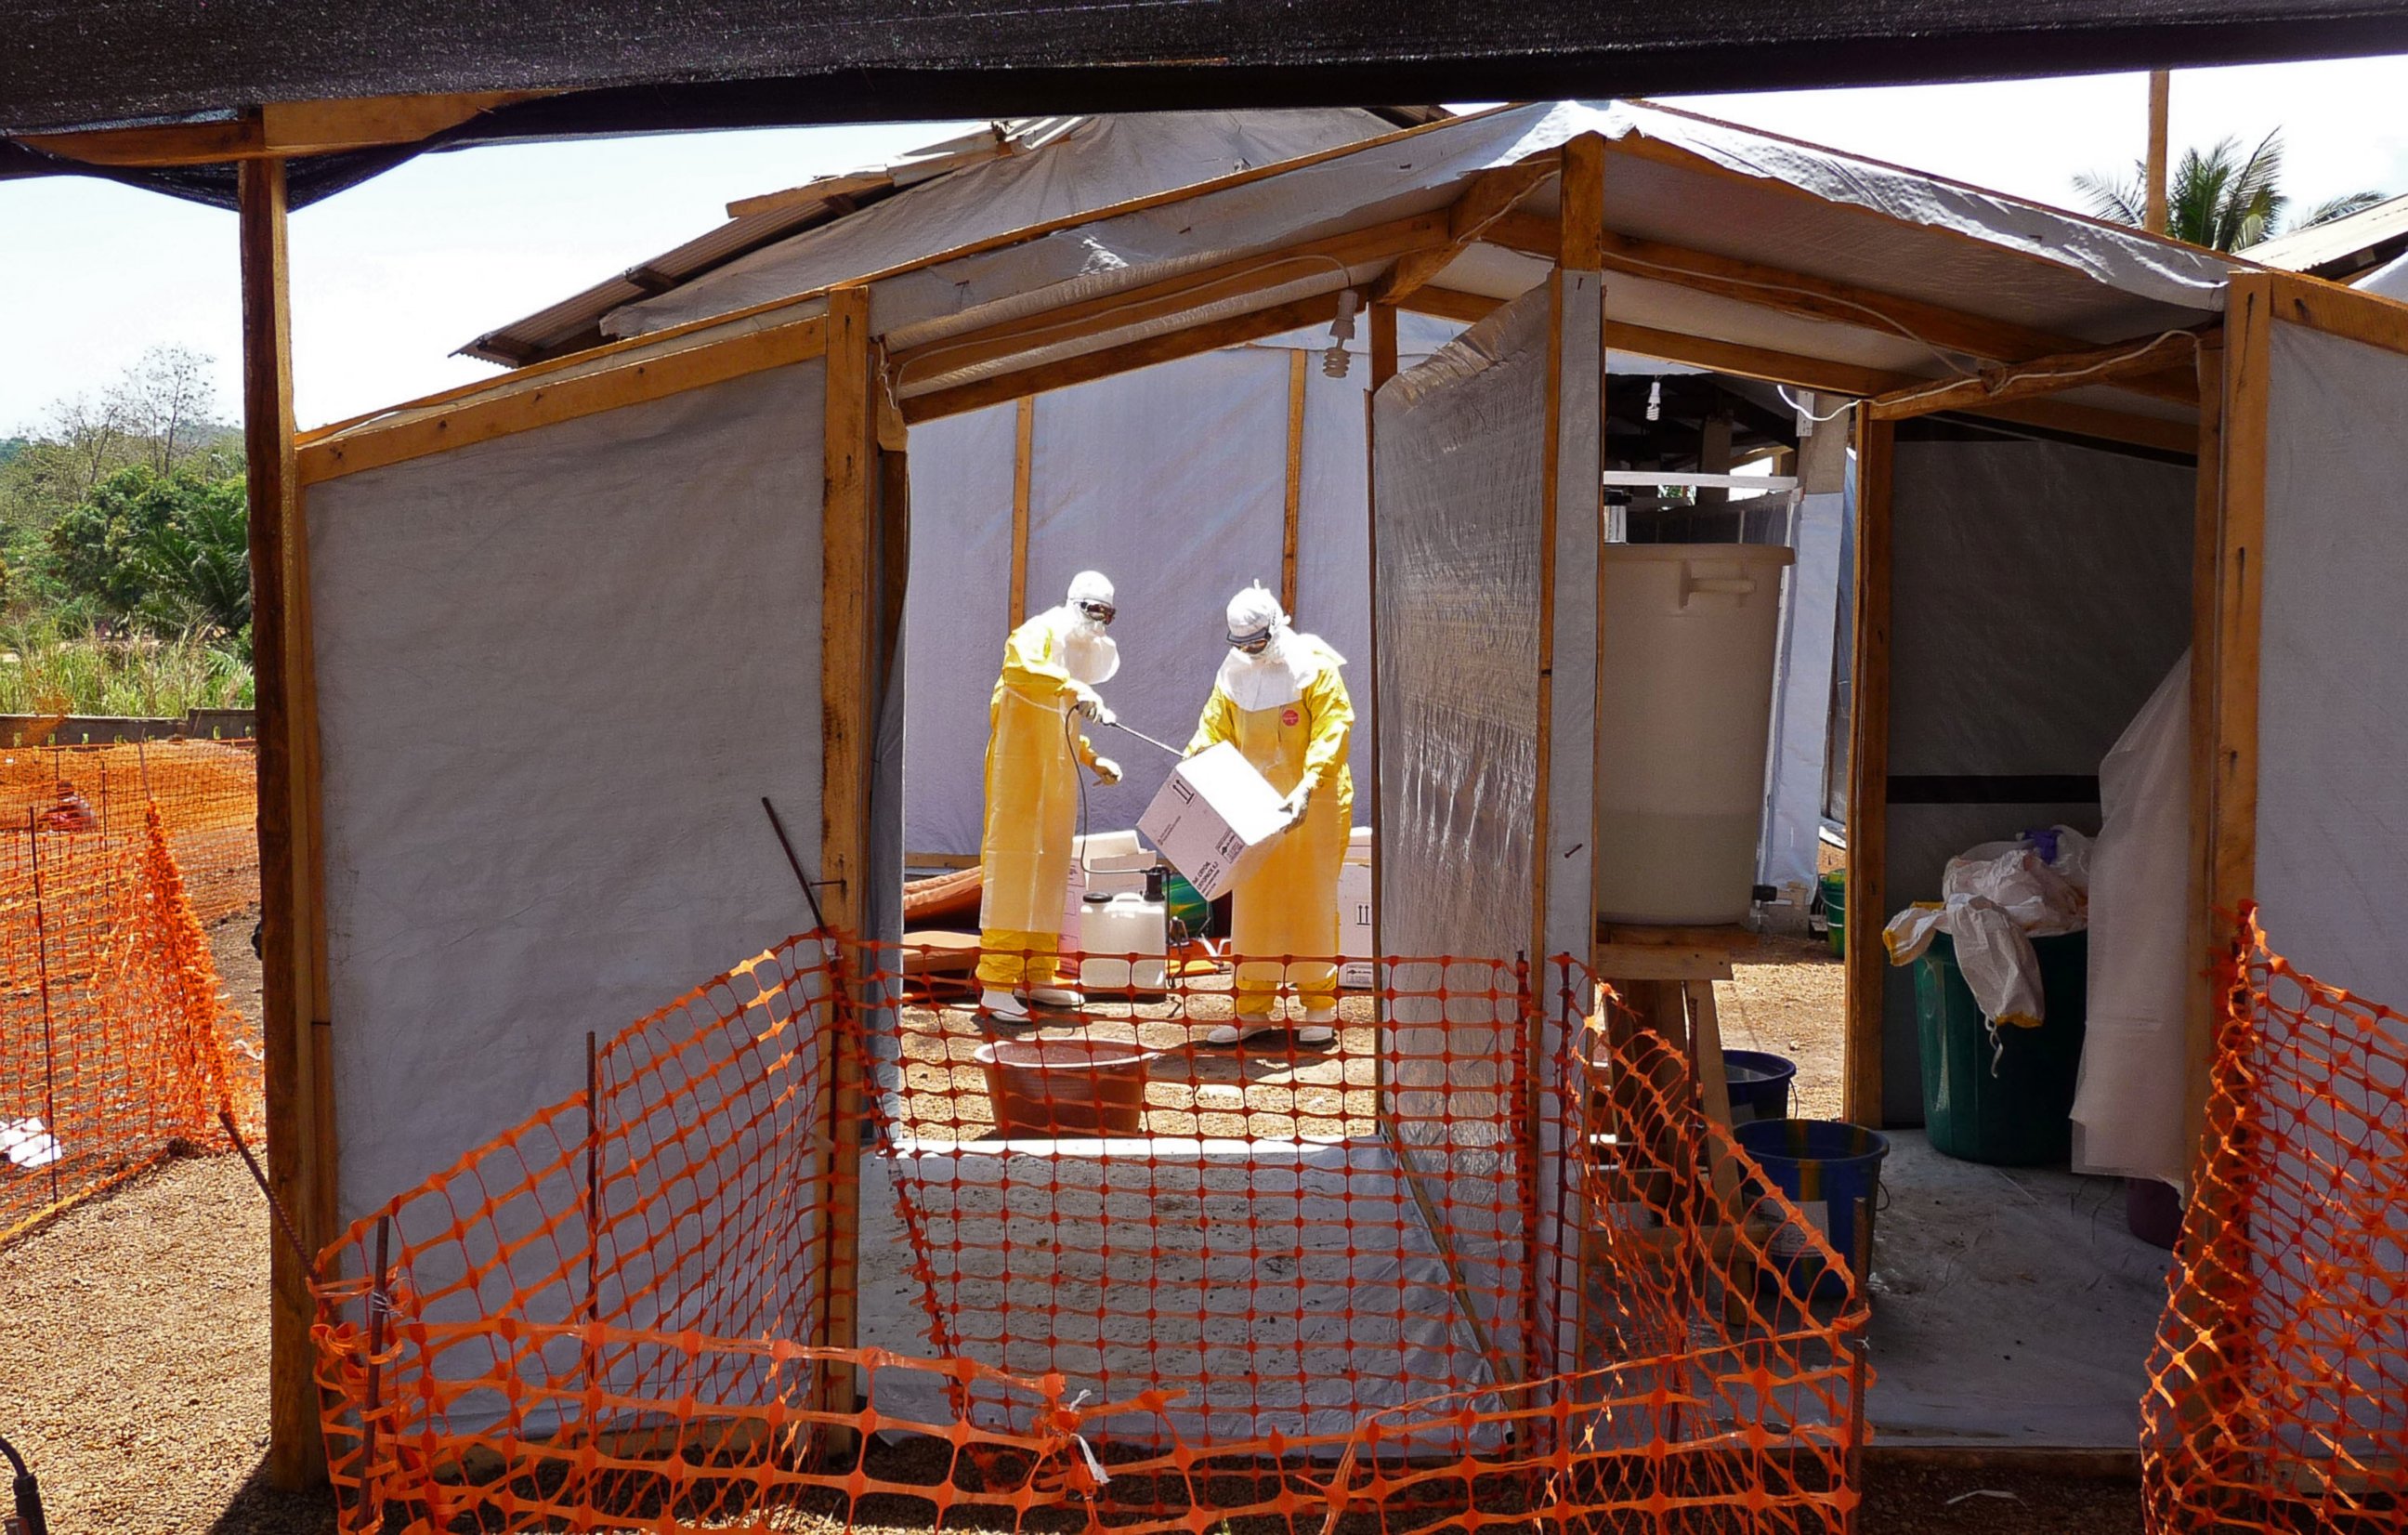 PHOTO: In this photo provide by MSF,  Medecins Sans Frontieres,  taken March 28, 2014, healthcare workers from the organisation prepare isolation and treatment areas for their Ebola, hemorrhagic fever operations, in Gueckedou, Guinea.